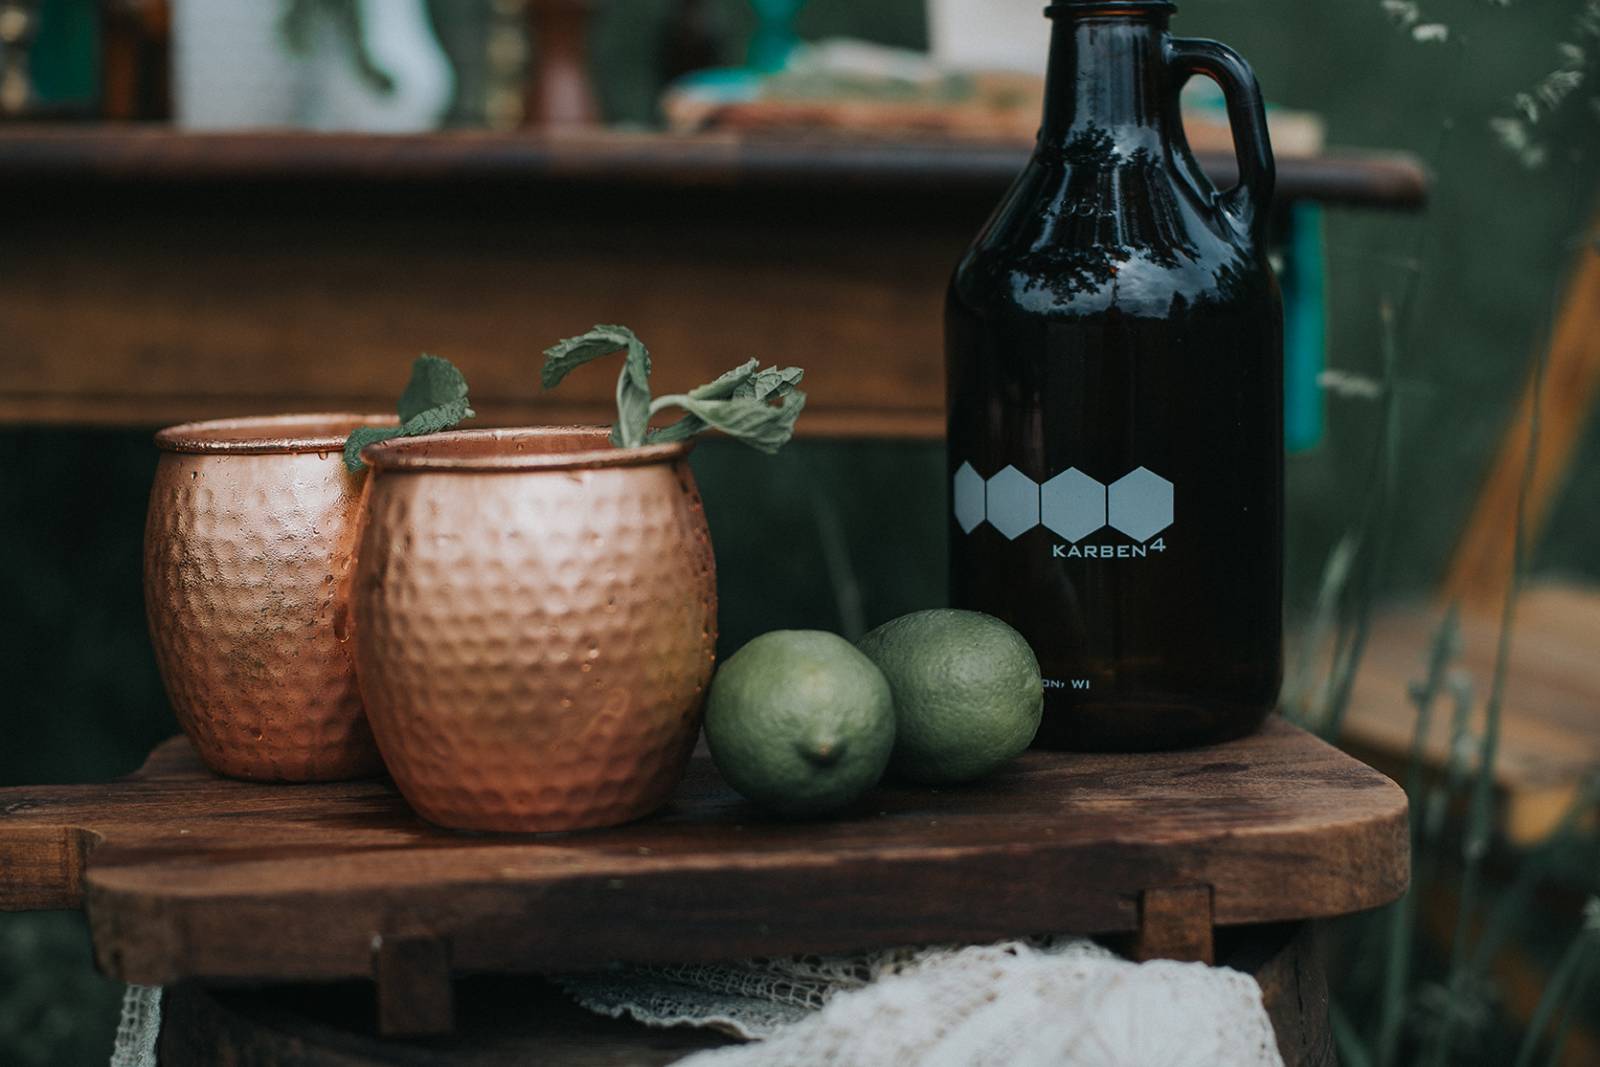 moscow mule drinks, crafted beer, copper mugs, copper wedding